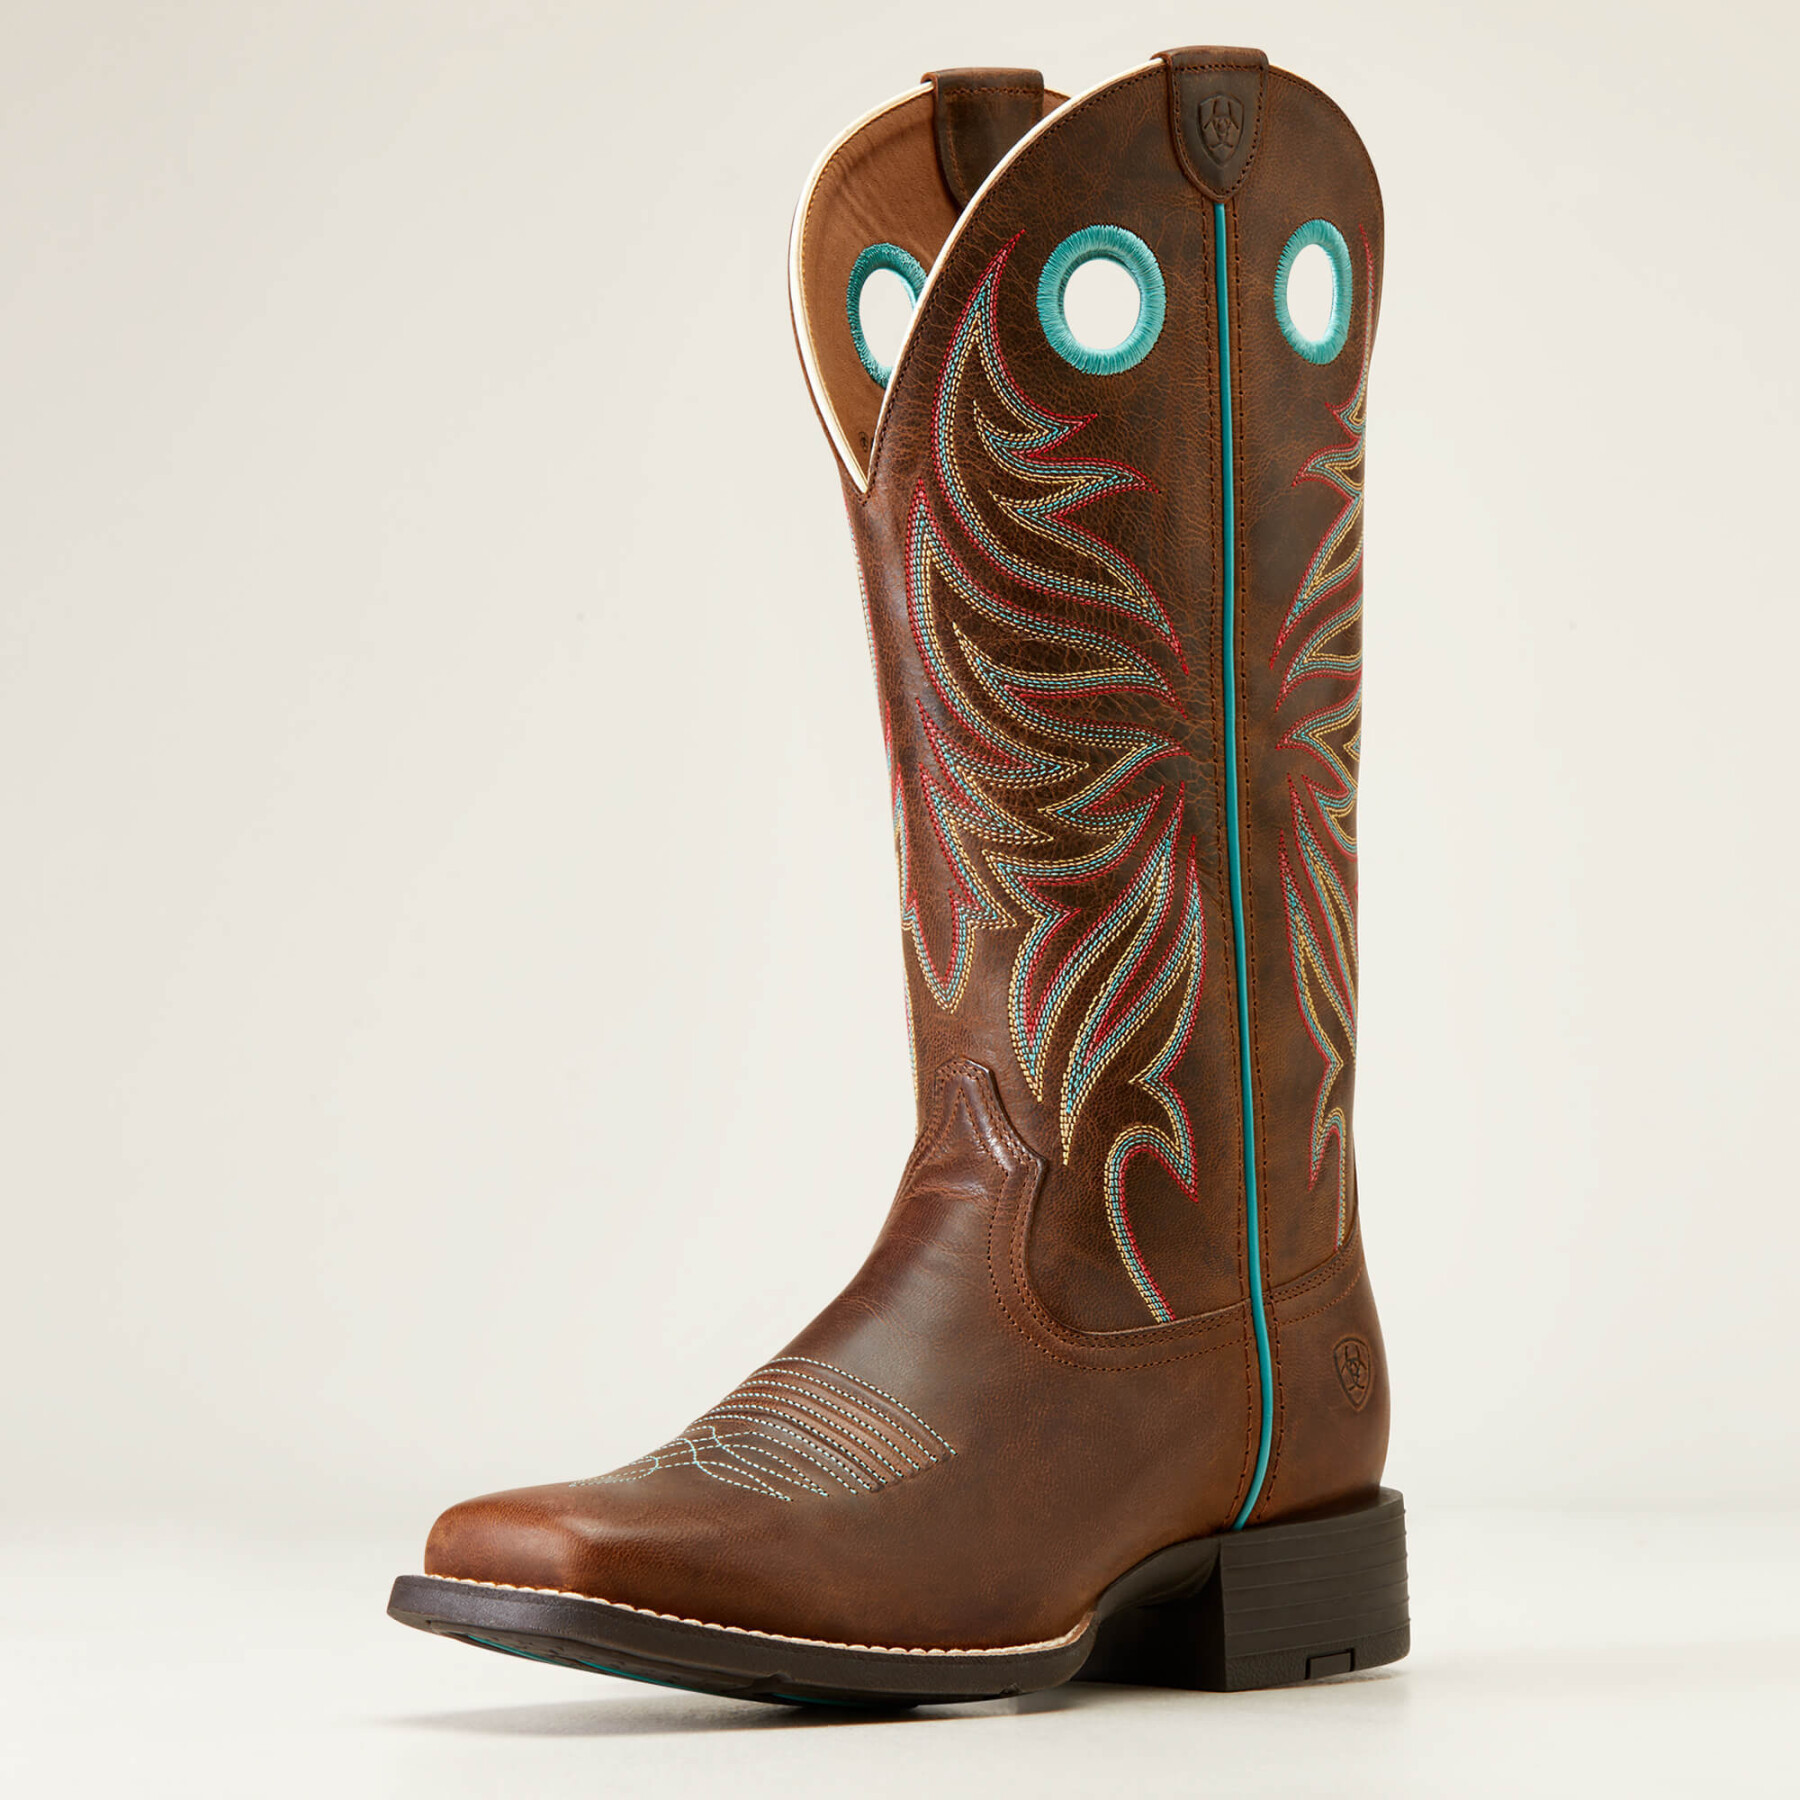 Women's leather western boots Ariat Round Up Ryder